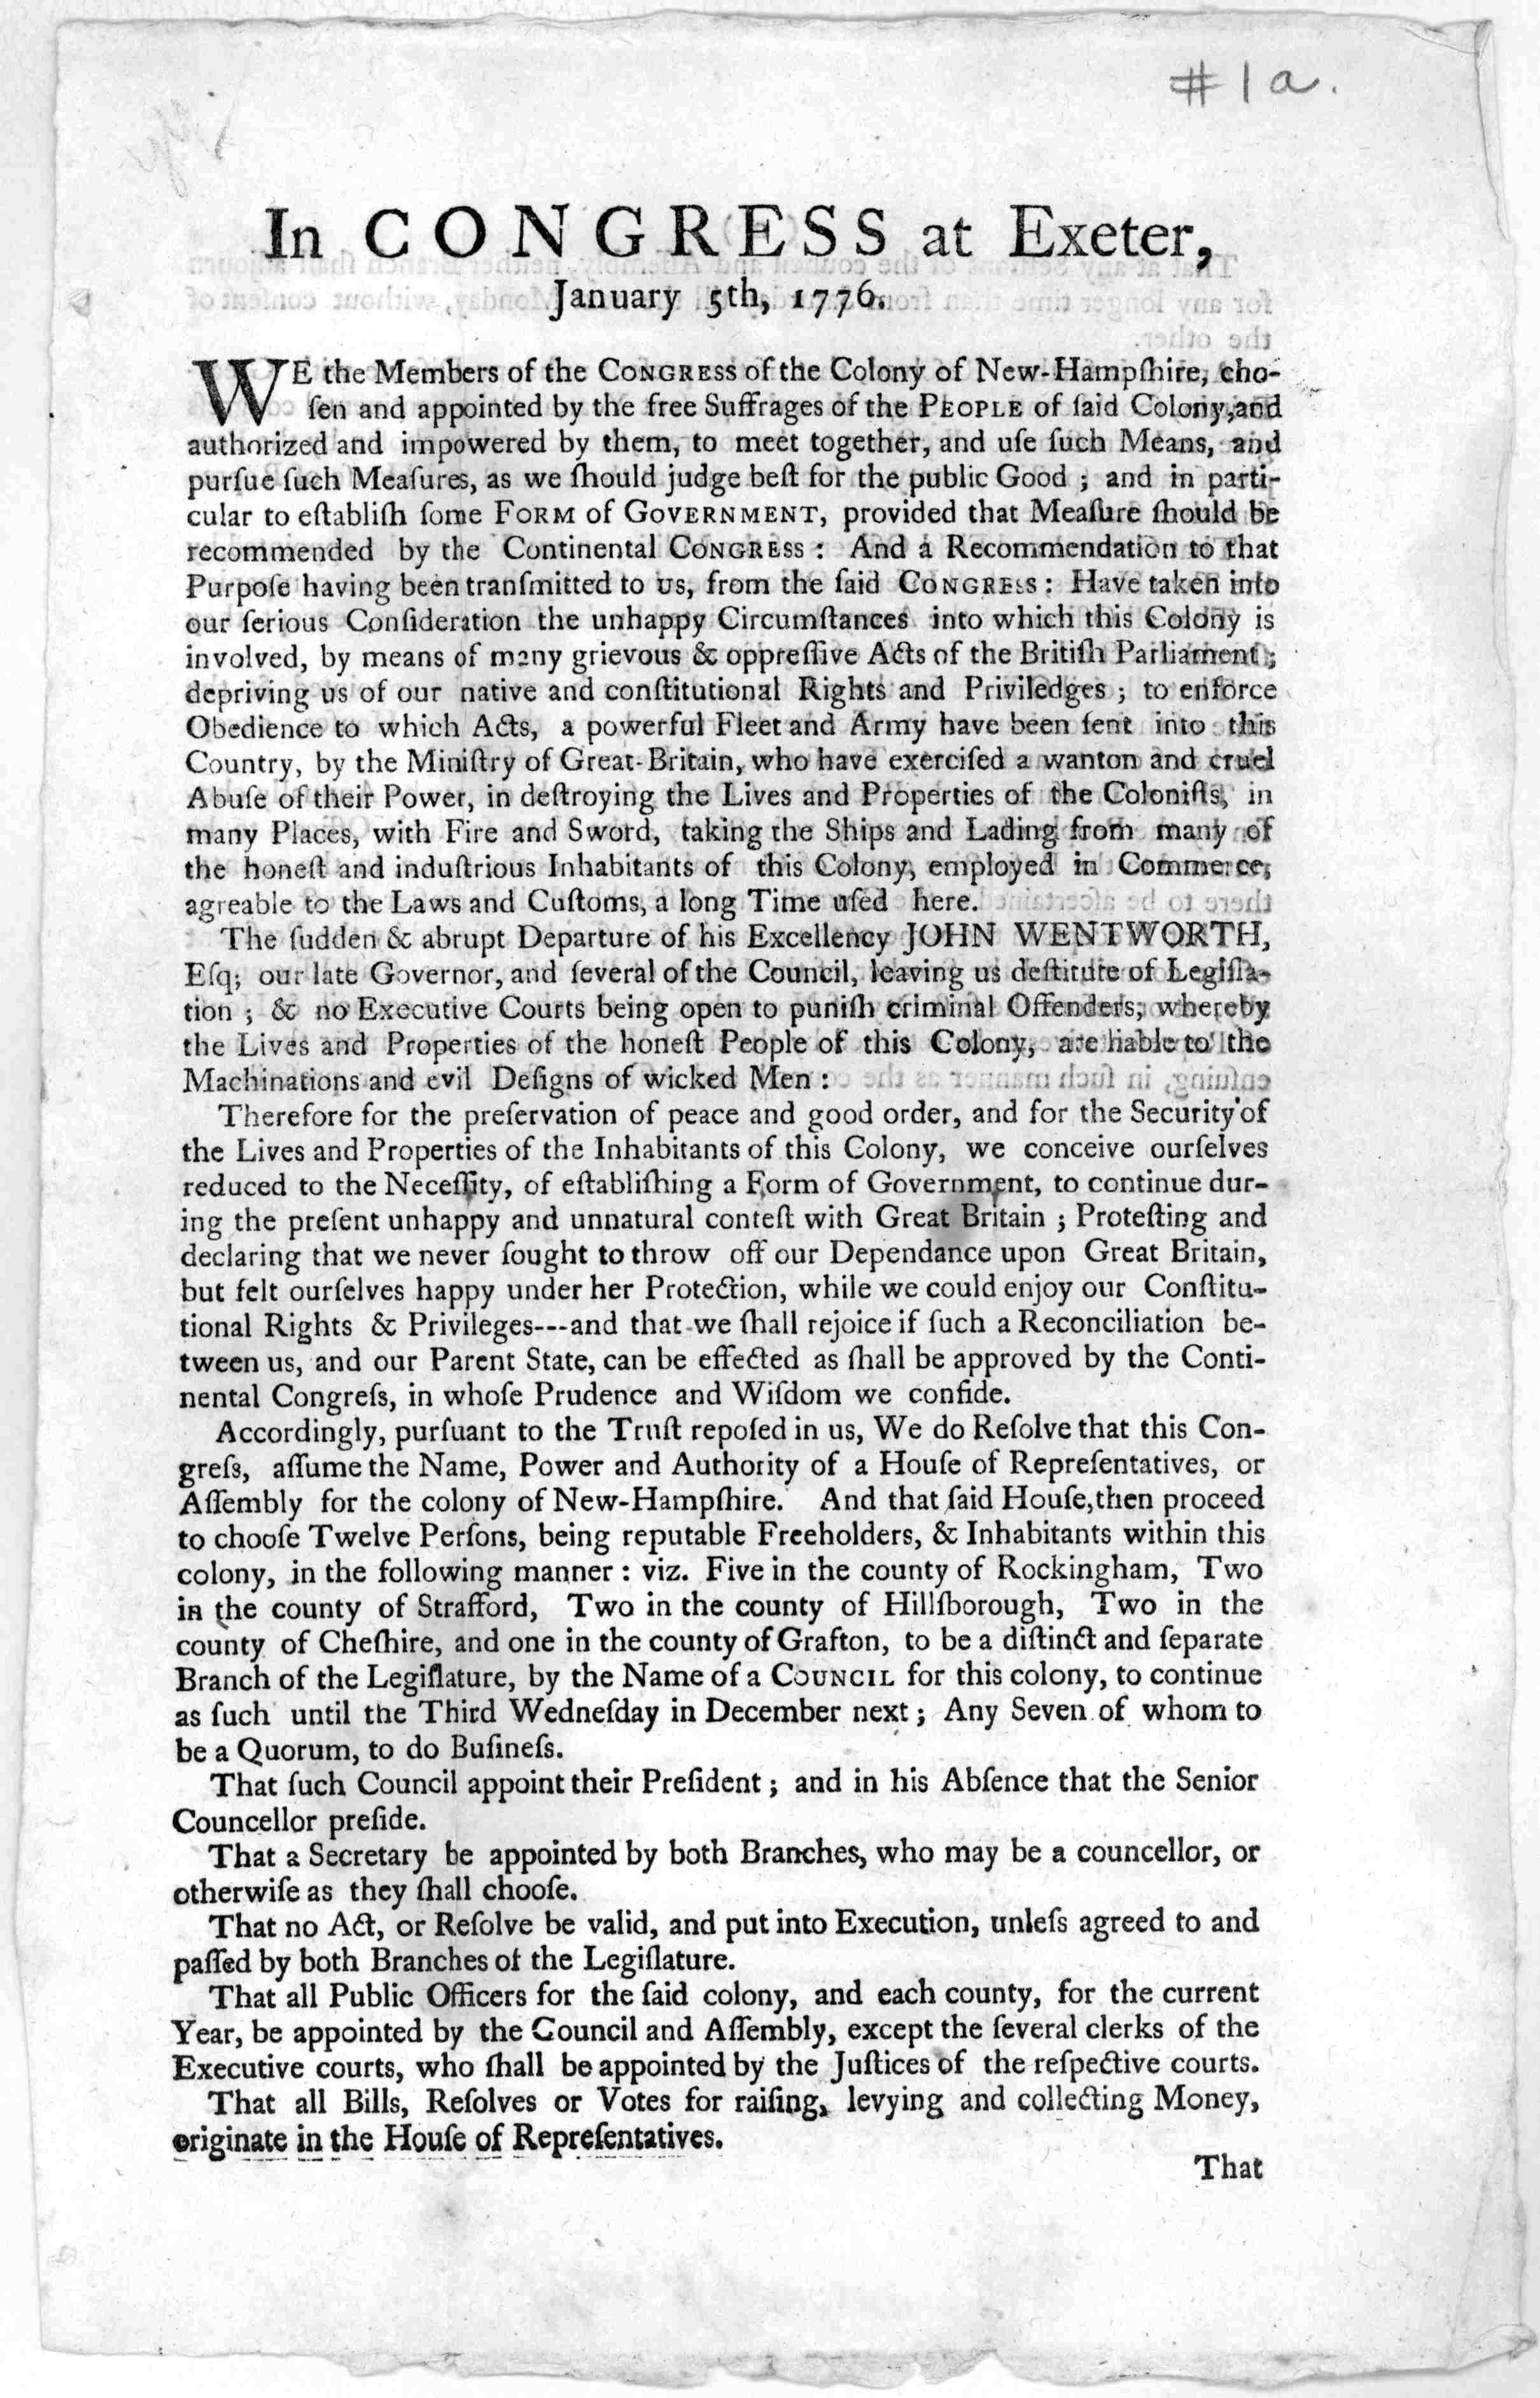  Photograph of the statement of purpose of the Congress of the Colony of New Hampshire, January 5, 1776, chosen and appointed by the free suffrages of the people of the said colony. Printed at Portsmouth, New Hampshire. References the sudden departure of Governor John Wentworth. Courtesy of The Library of Congress, Washington, D.C. Note that the name is misnomer; this is not a broadside, being printed on both sides and multiple pages.